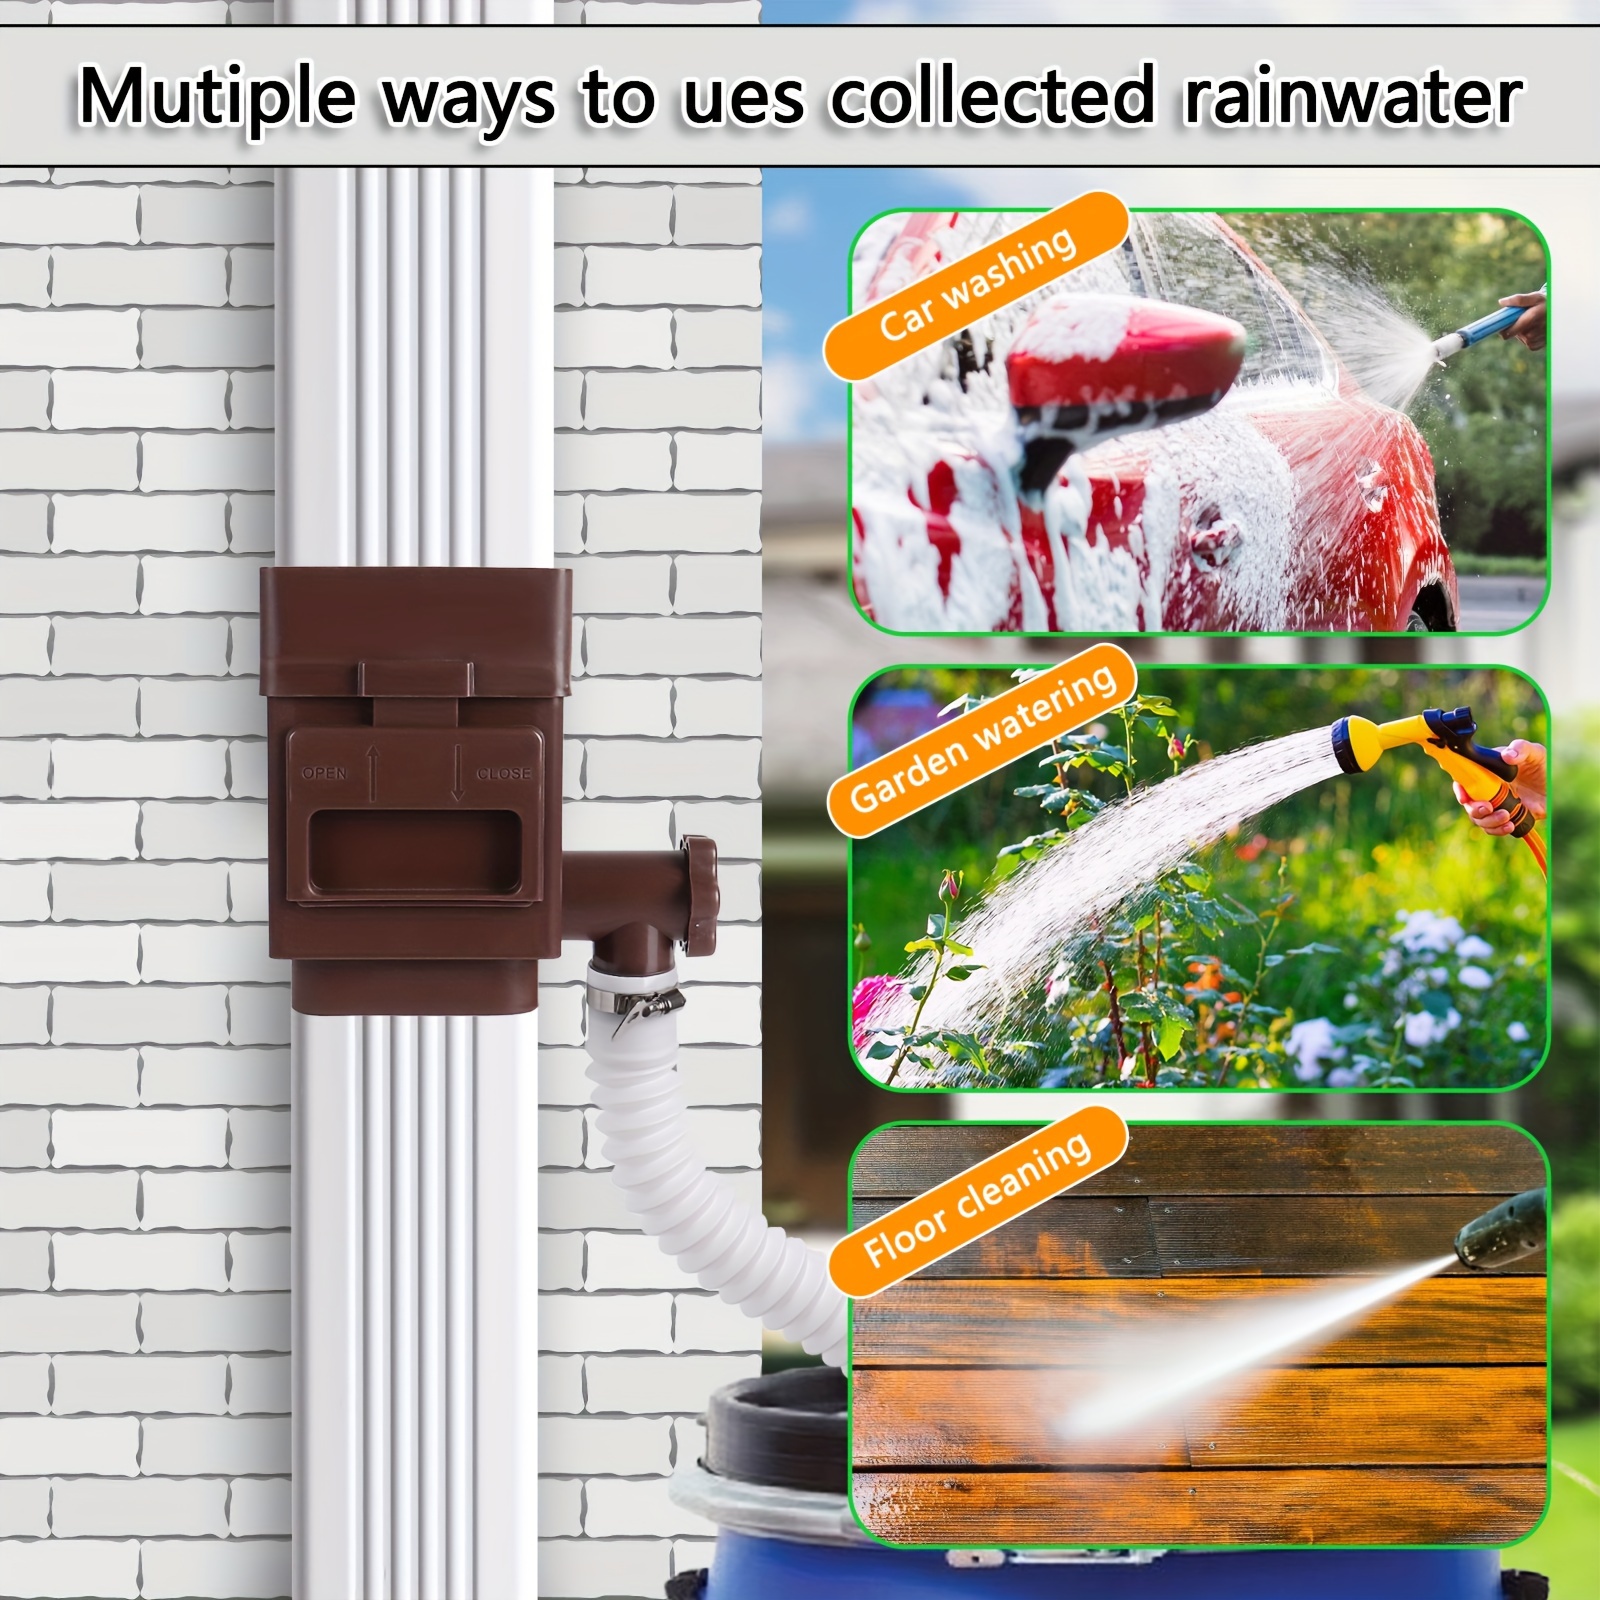 

3rd Gen Rainwater Collection System - Durable Plastic Drain Diverter Kit For Efficient Water Management Collection System Diverter